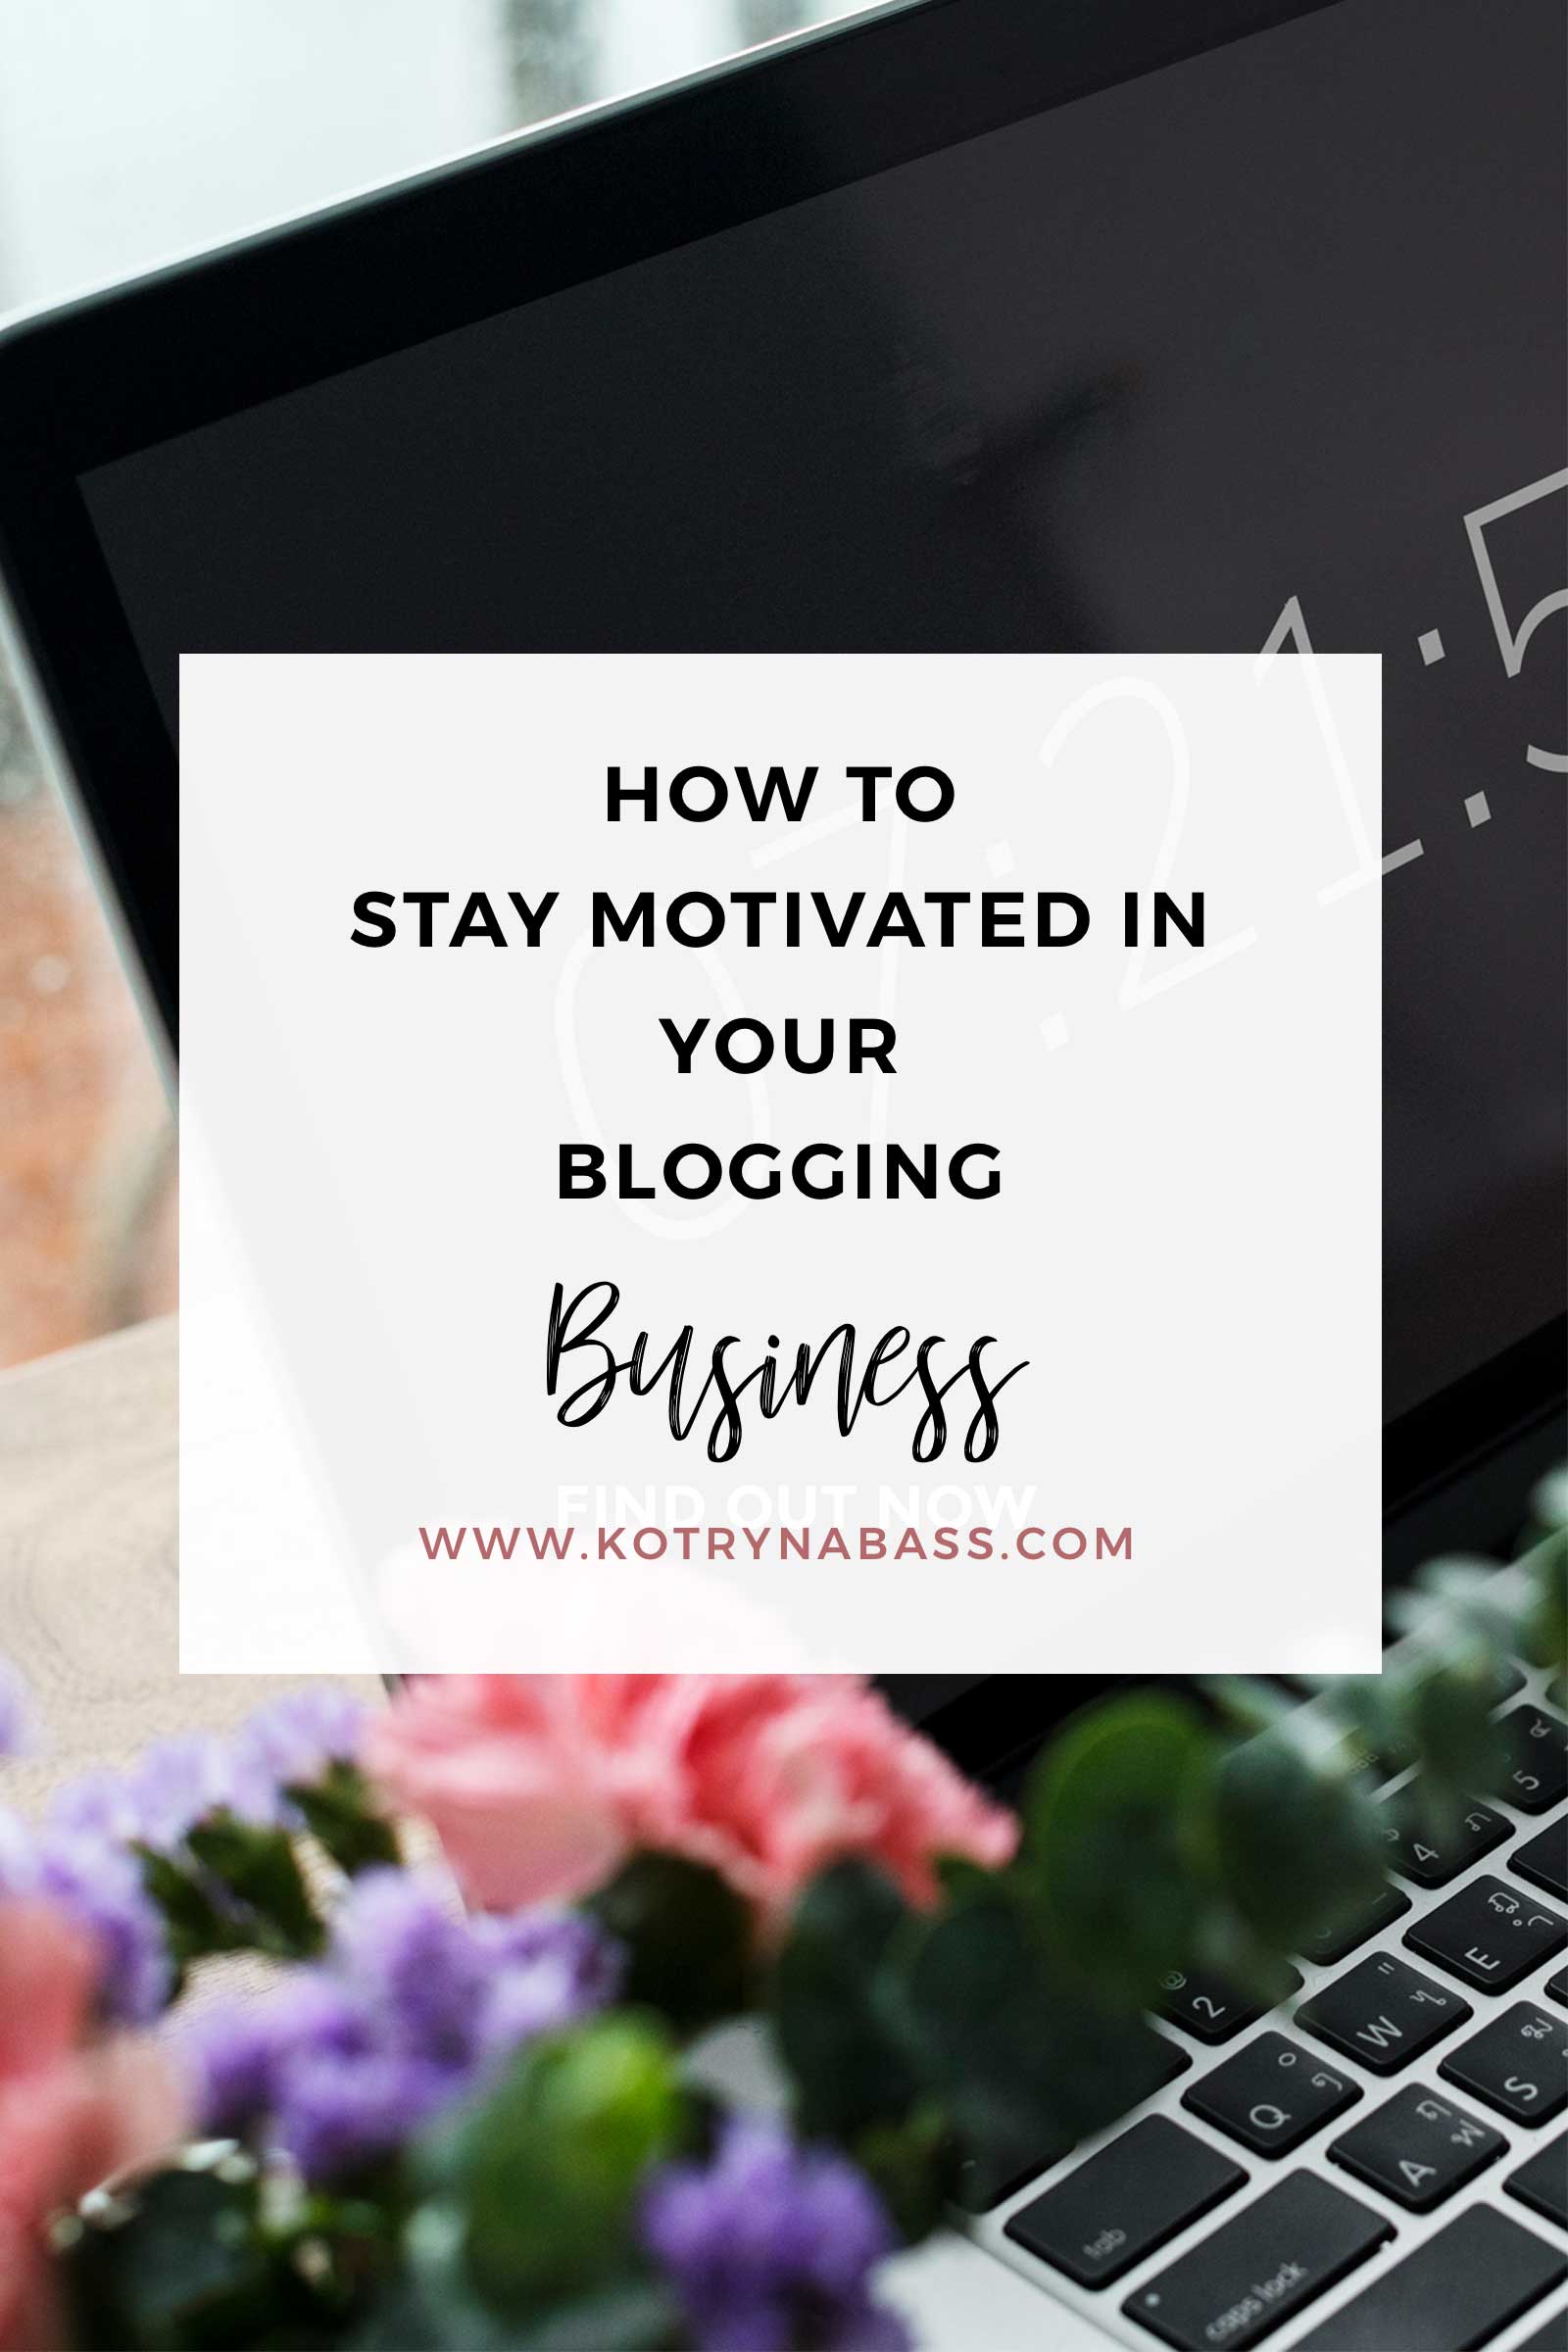 Blogging isn't always fun, I know! In fact, the job requires so much creativity on the daily bases that it's fairly simple to feel burned out, especially if you're not seeing those fast results you're working for. Good news is, there are a few tricks you can do to keep yourself motivated, let me share them with you...